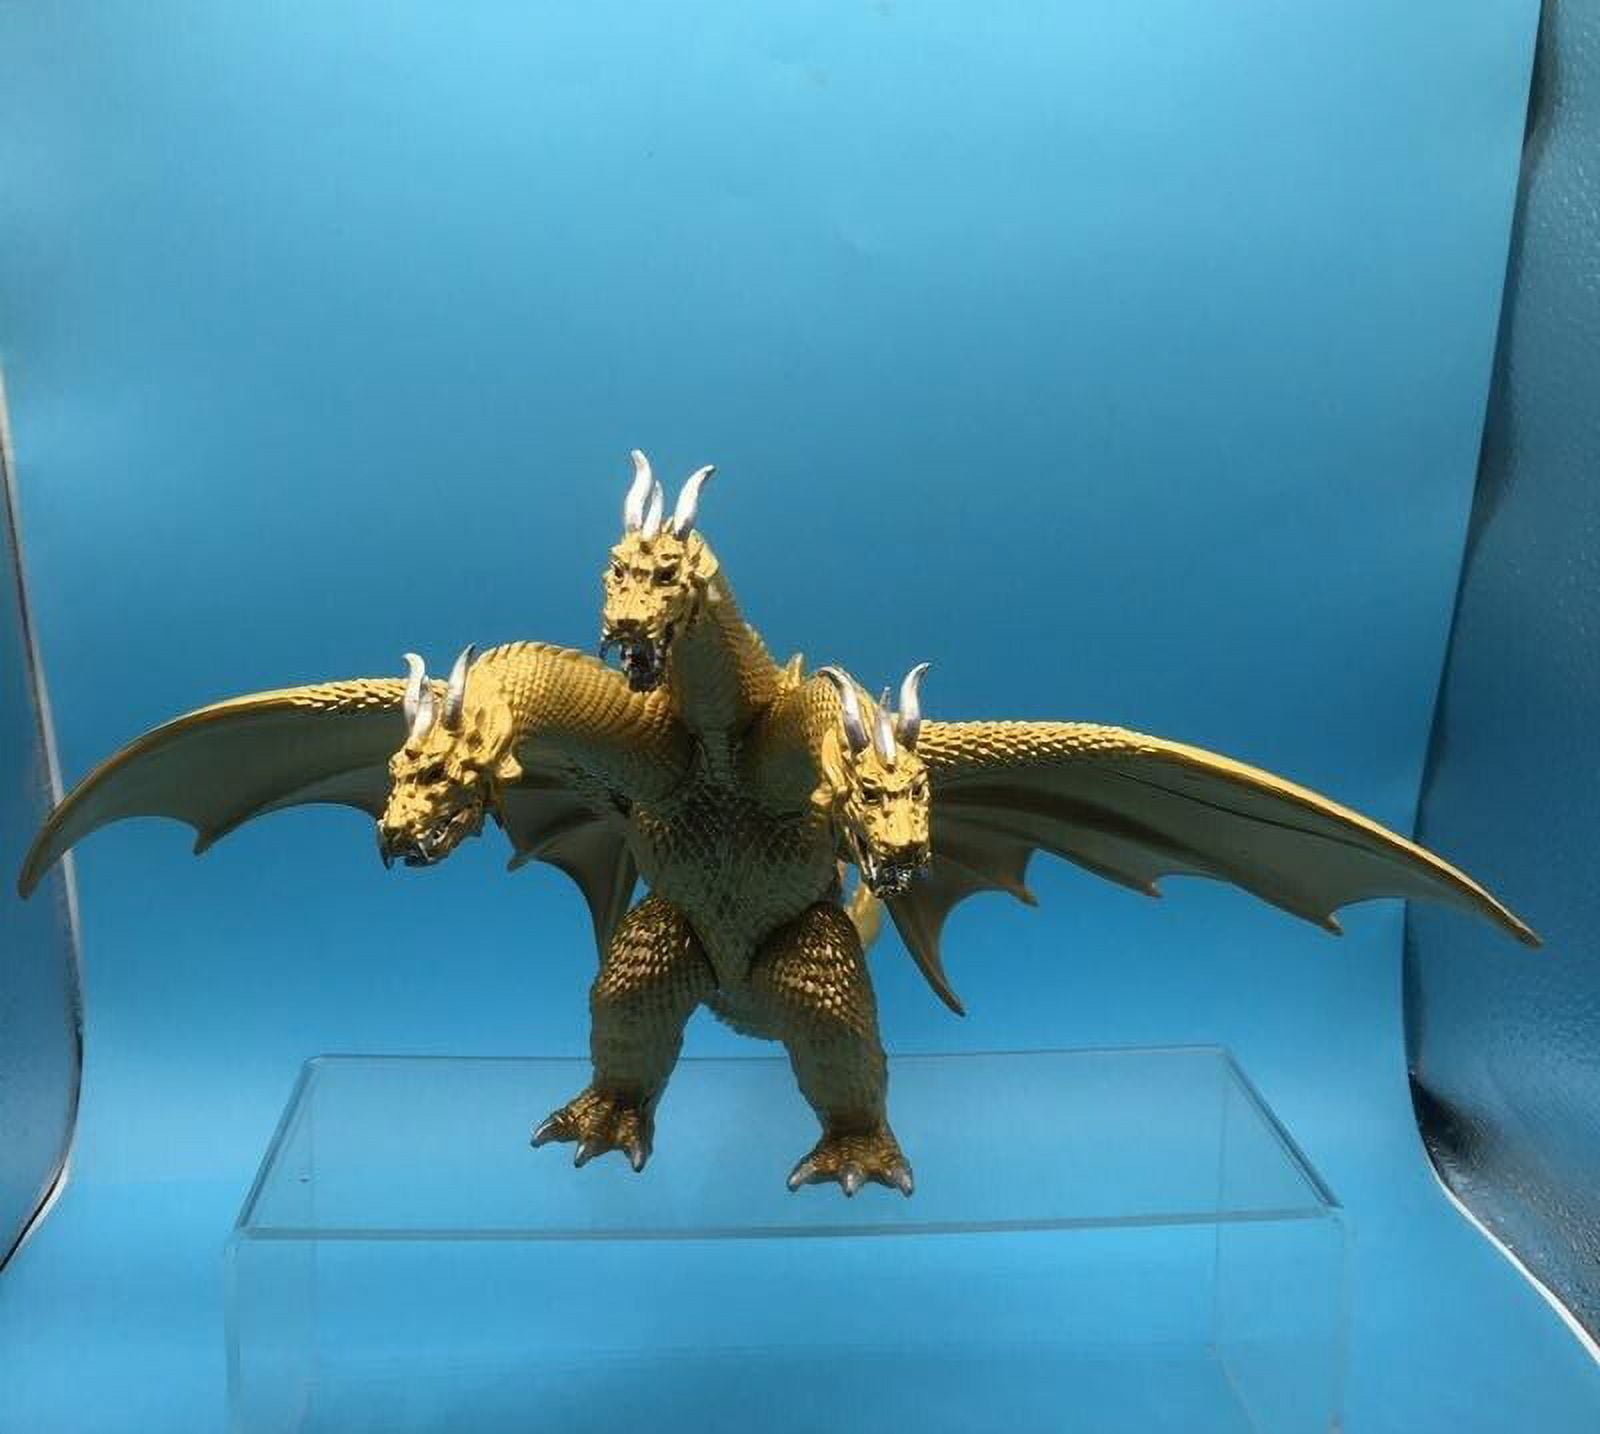 Godzilla 2019: King of the Monsters Ghidorah Action Figure - 8